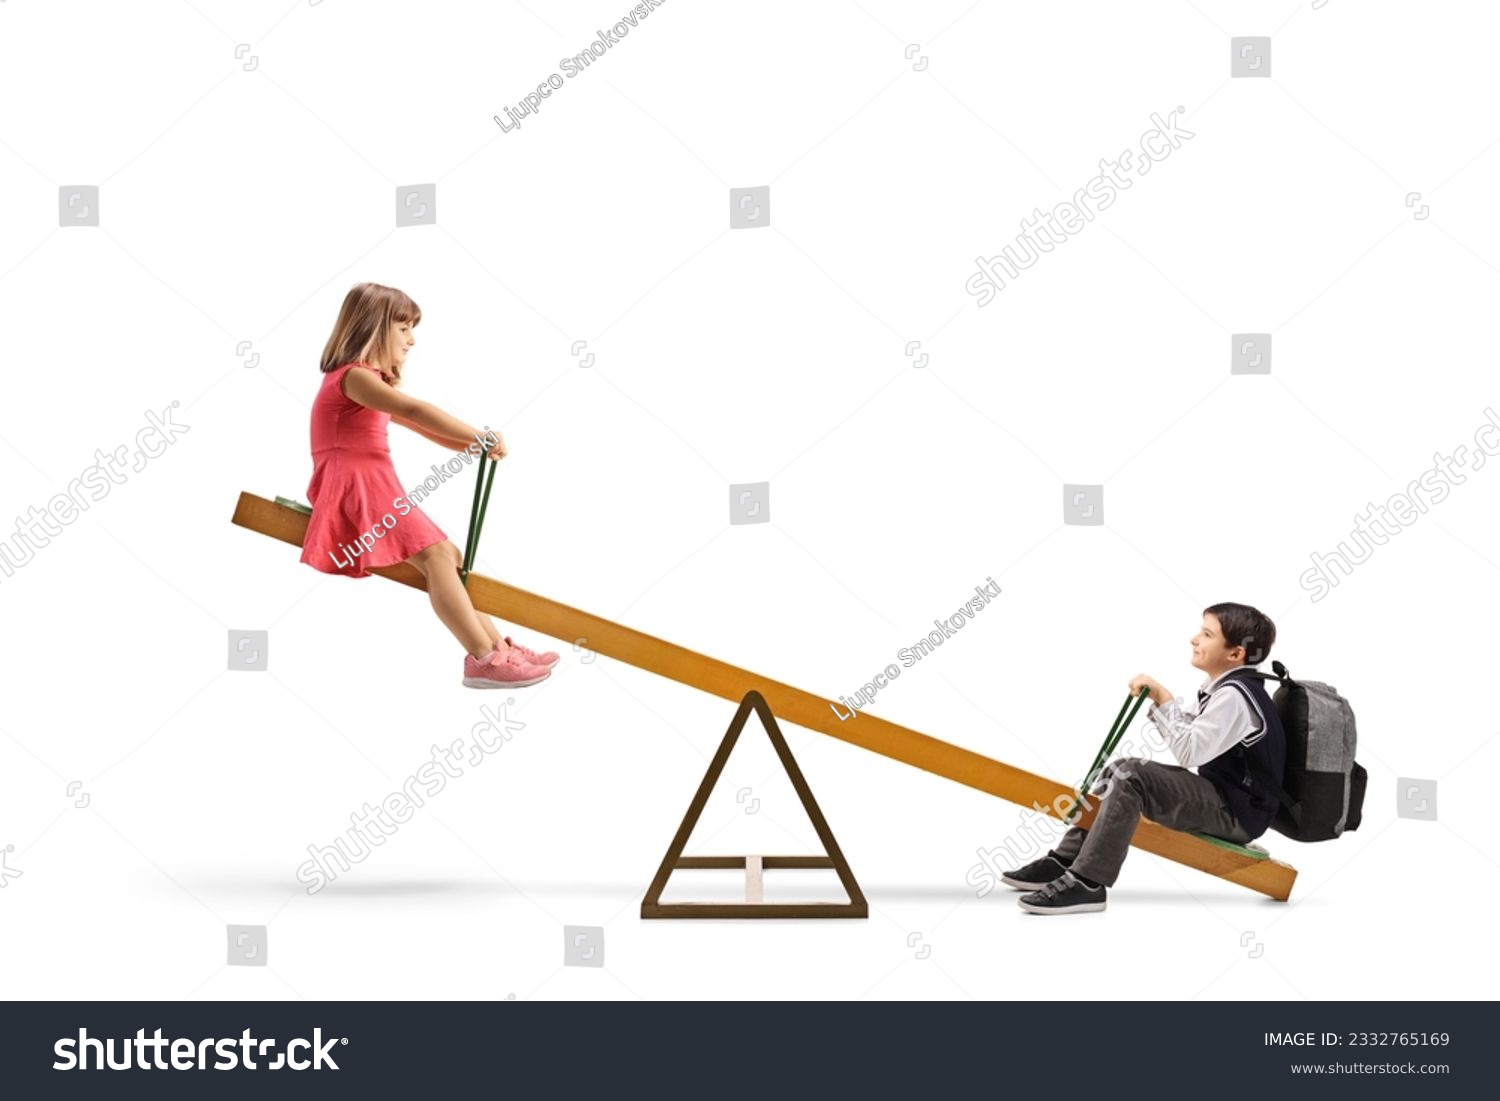 Sister and brother playing on a seesaw isolated on white background #2332765169